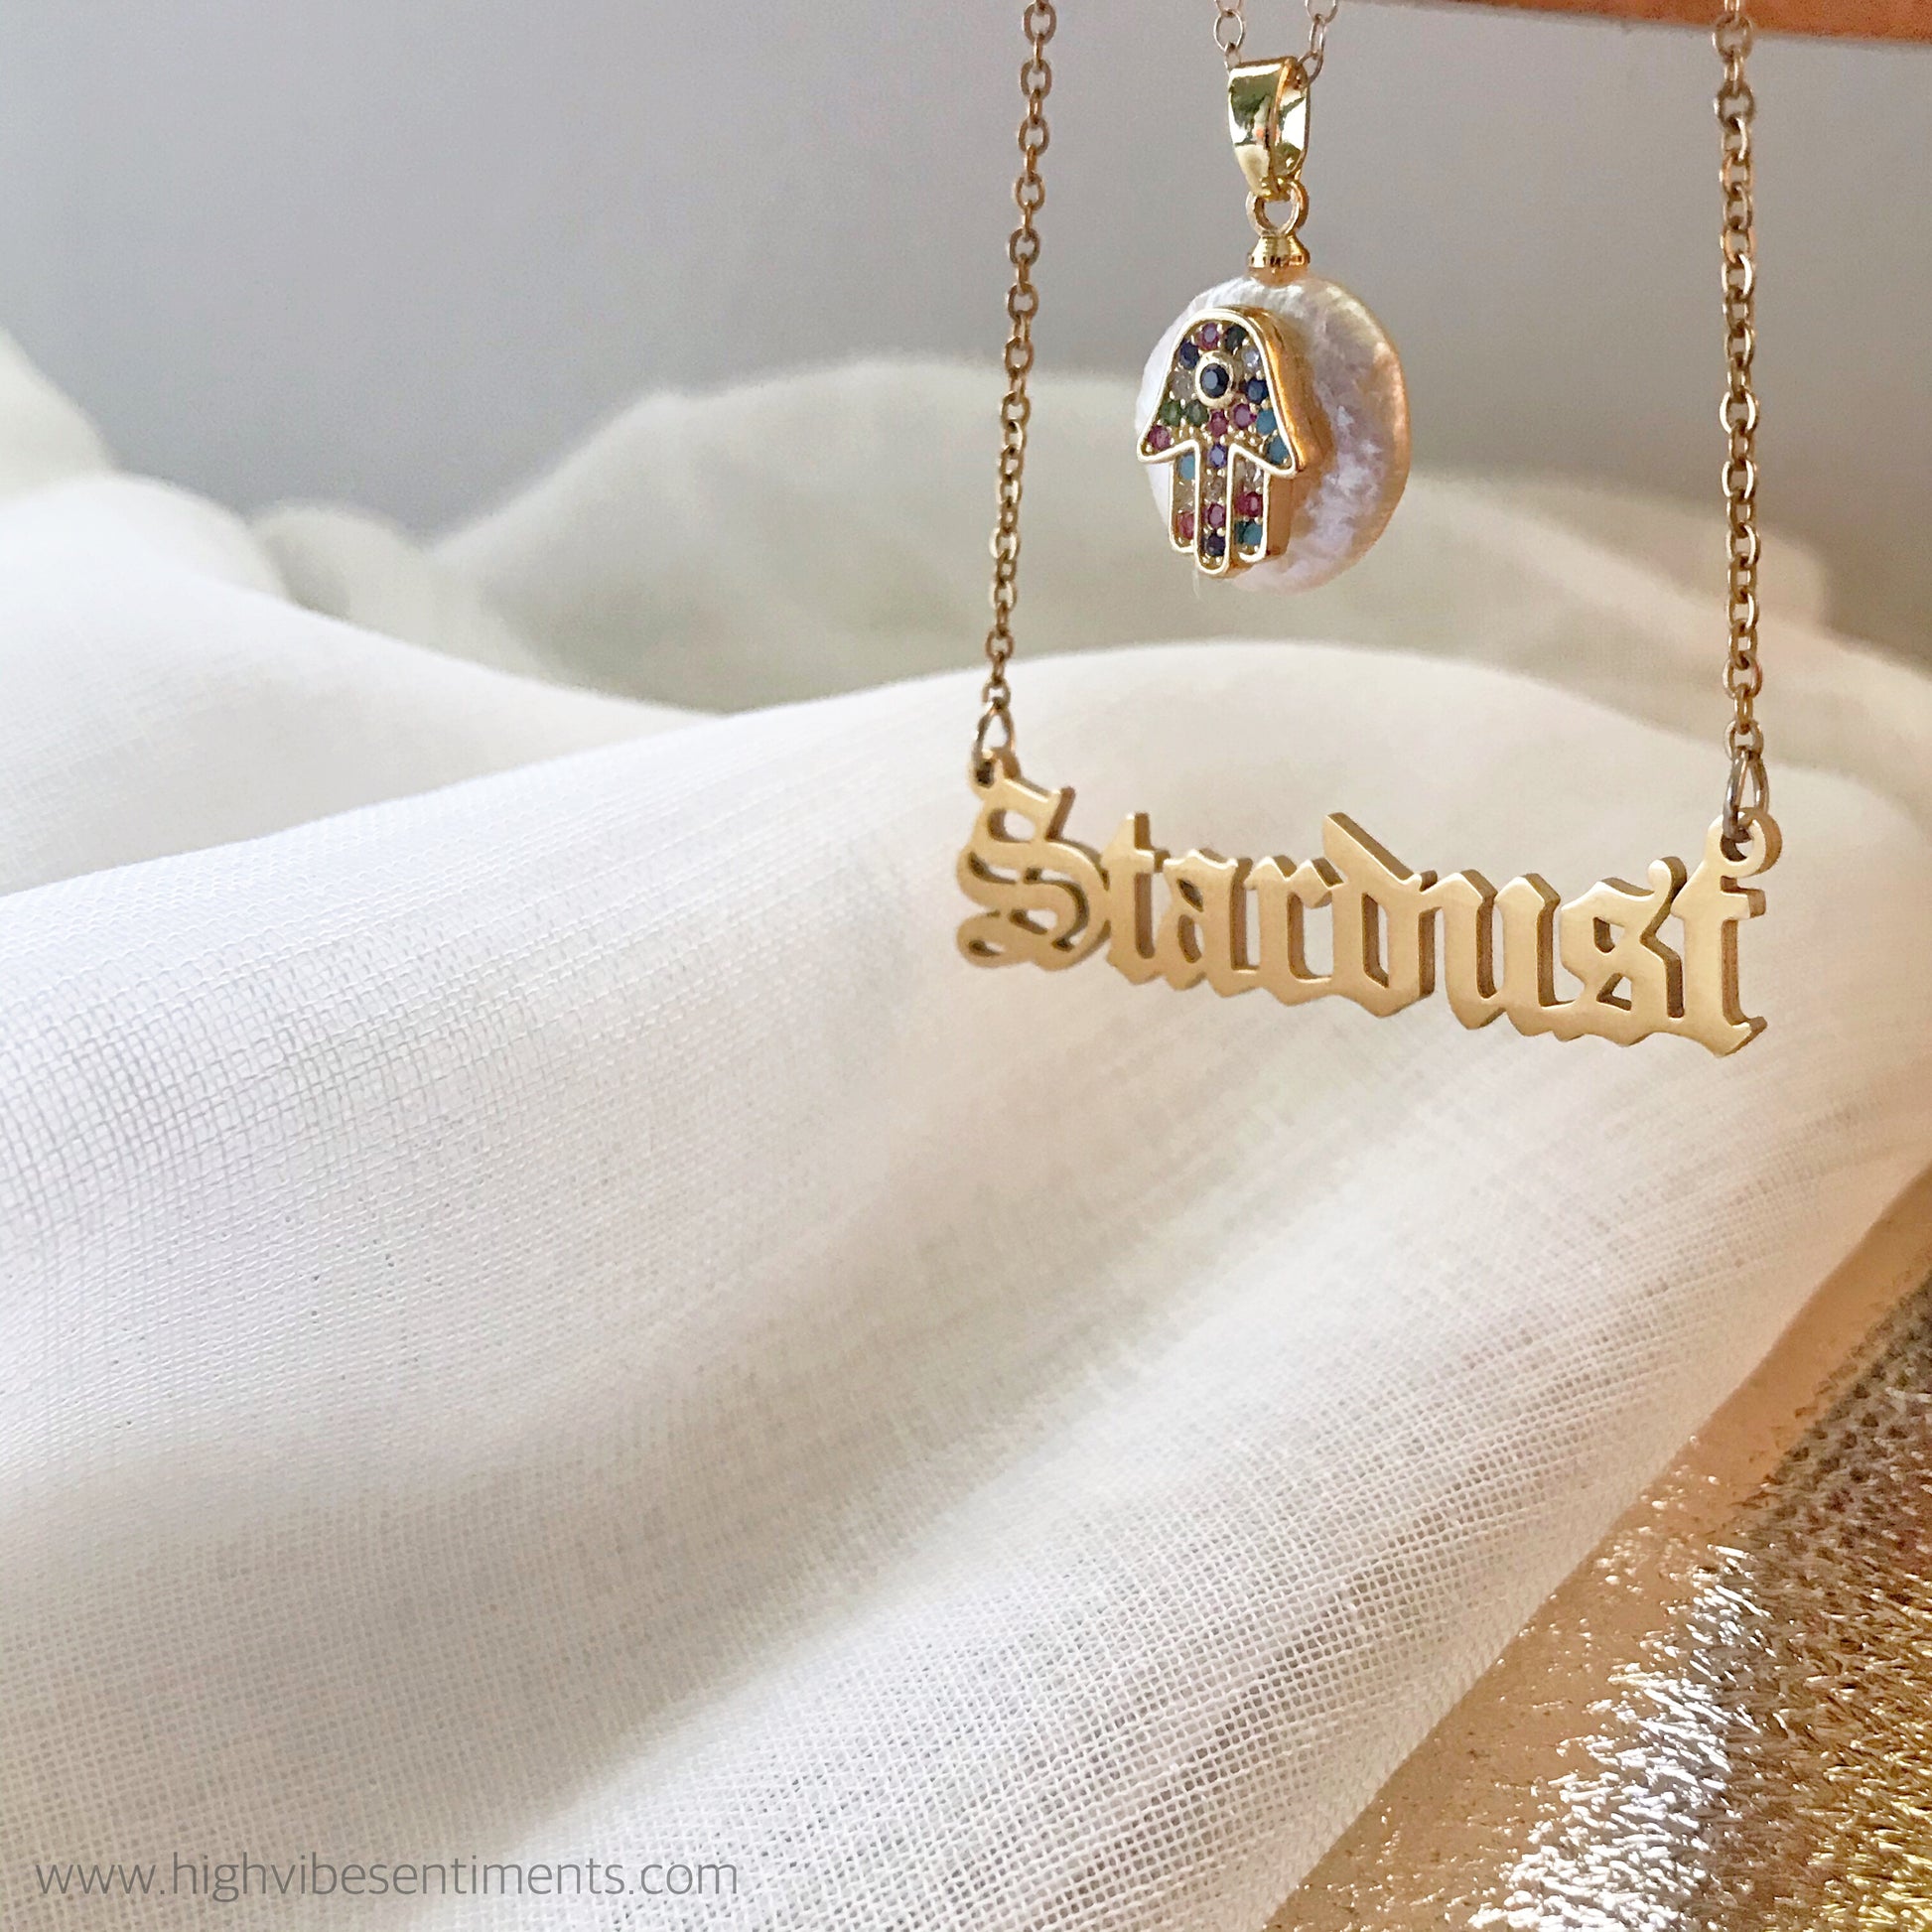 High Vibe Sentiments Stardust Nameplate and Hamsa and Pearl Necklace